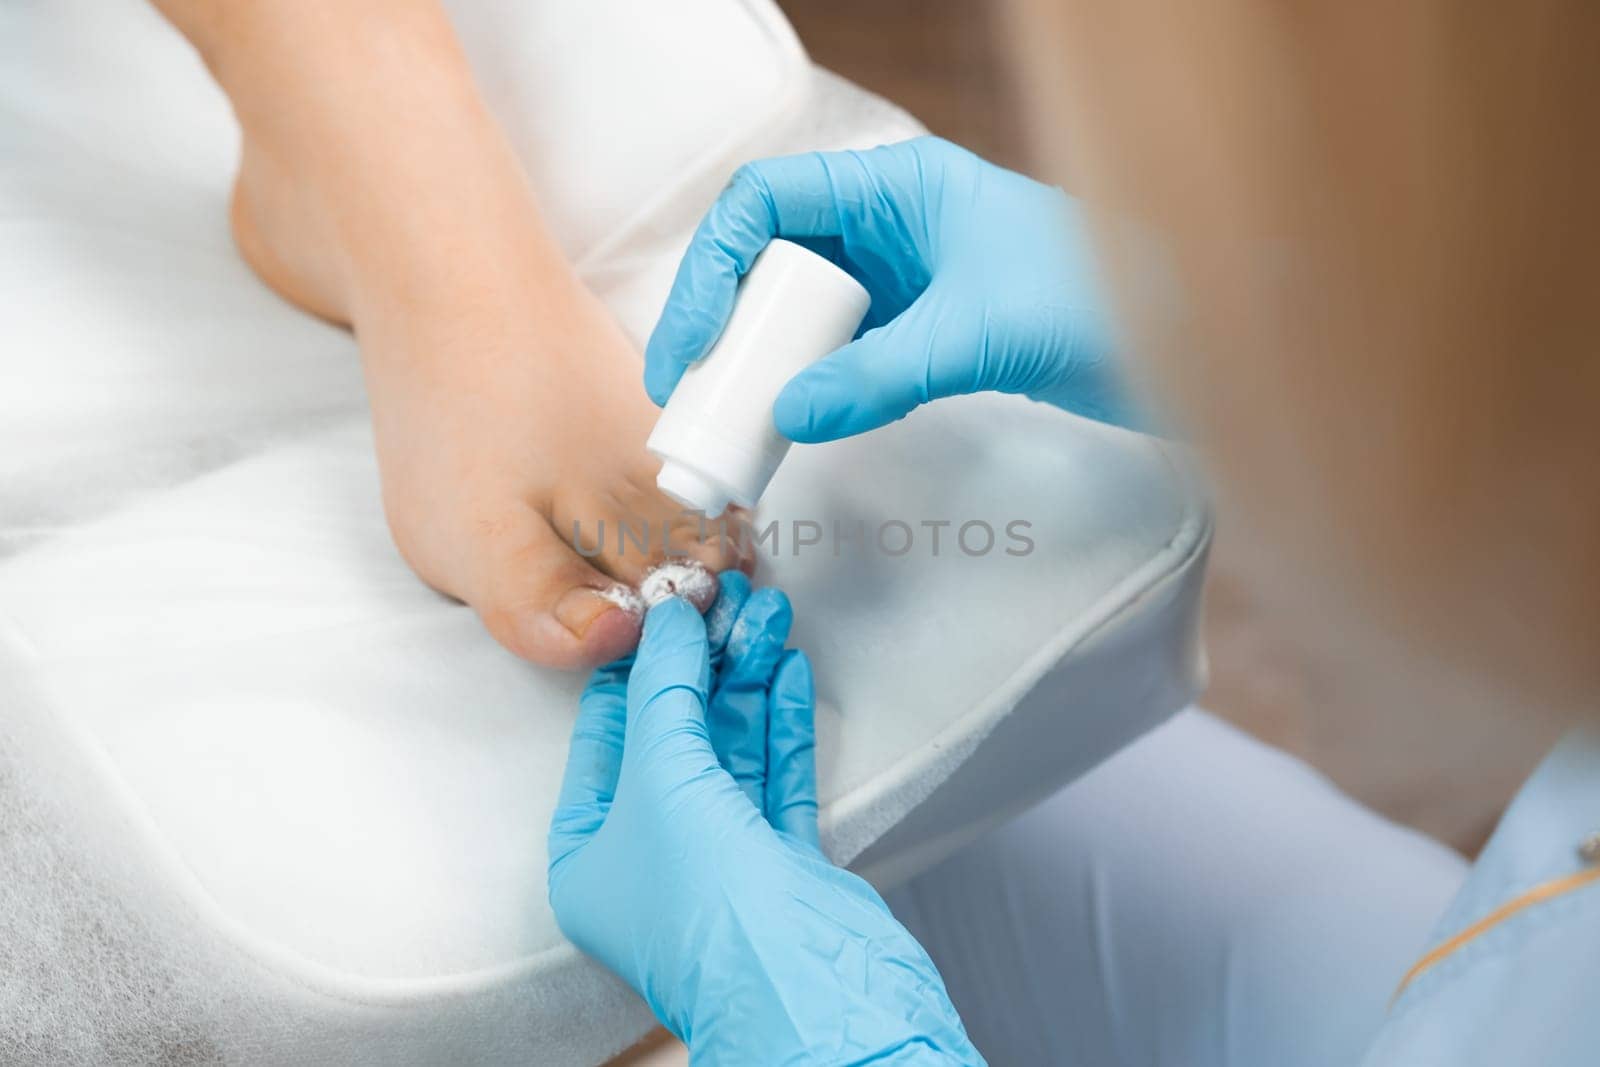 After extracting the nail, the podologist applies a fine antiseptic powder to the toe